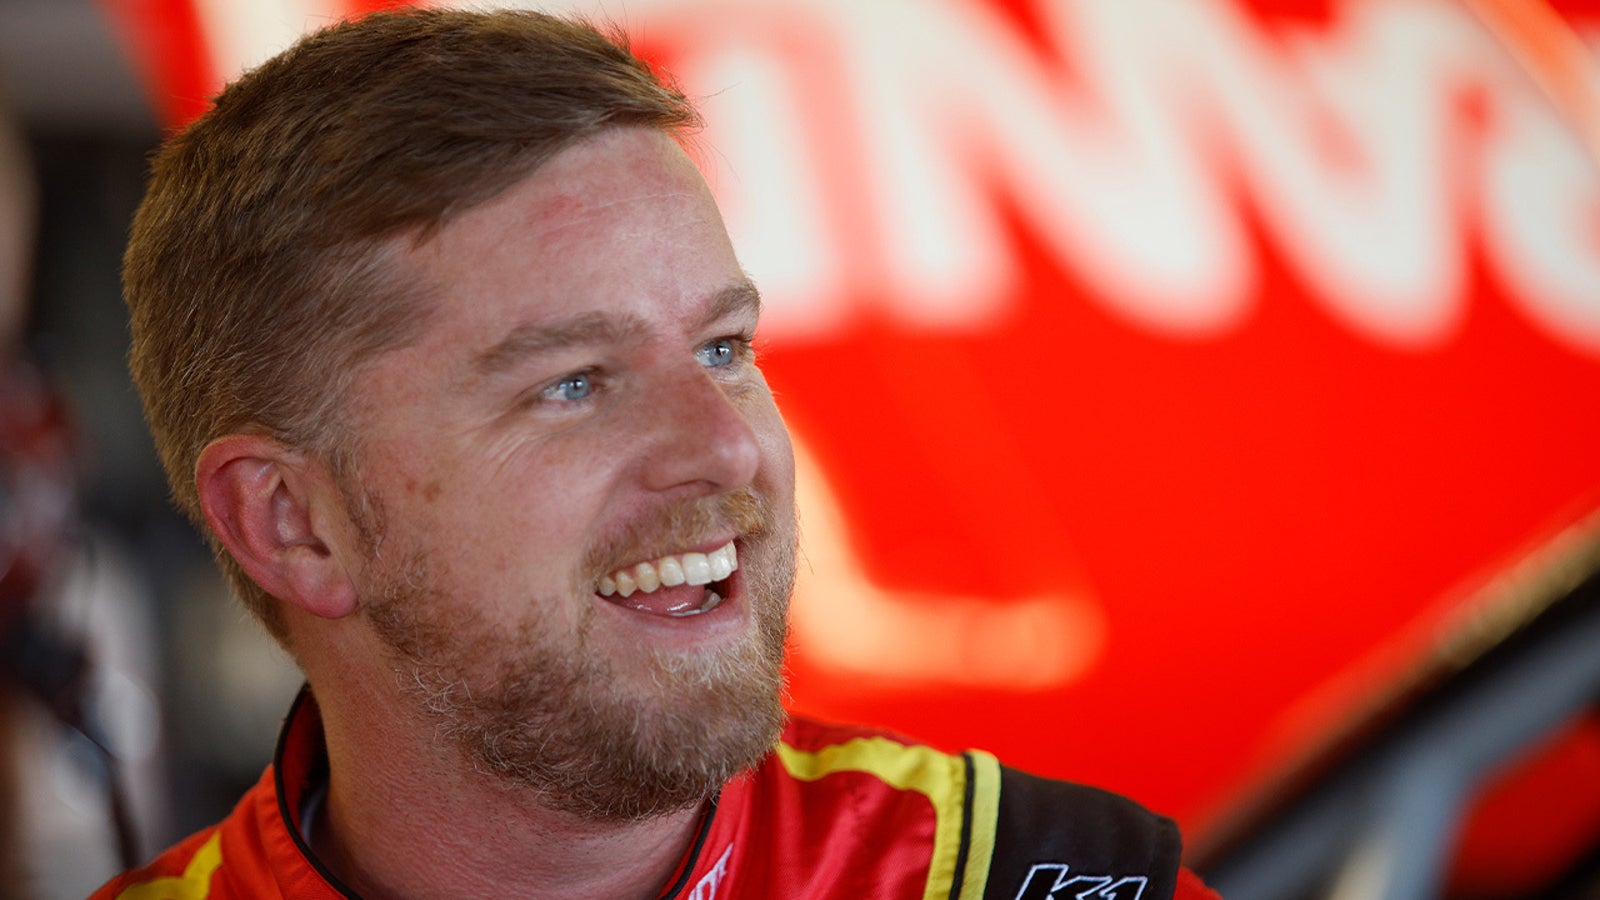 Justin Allgaier gives his thoughts on the double-yellow-line rule I NASCAR on FOX